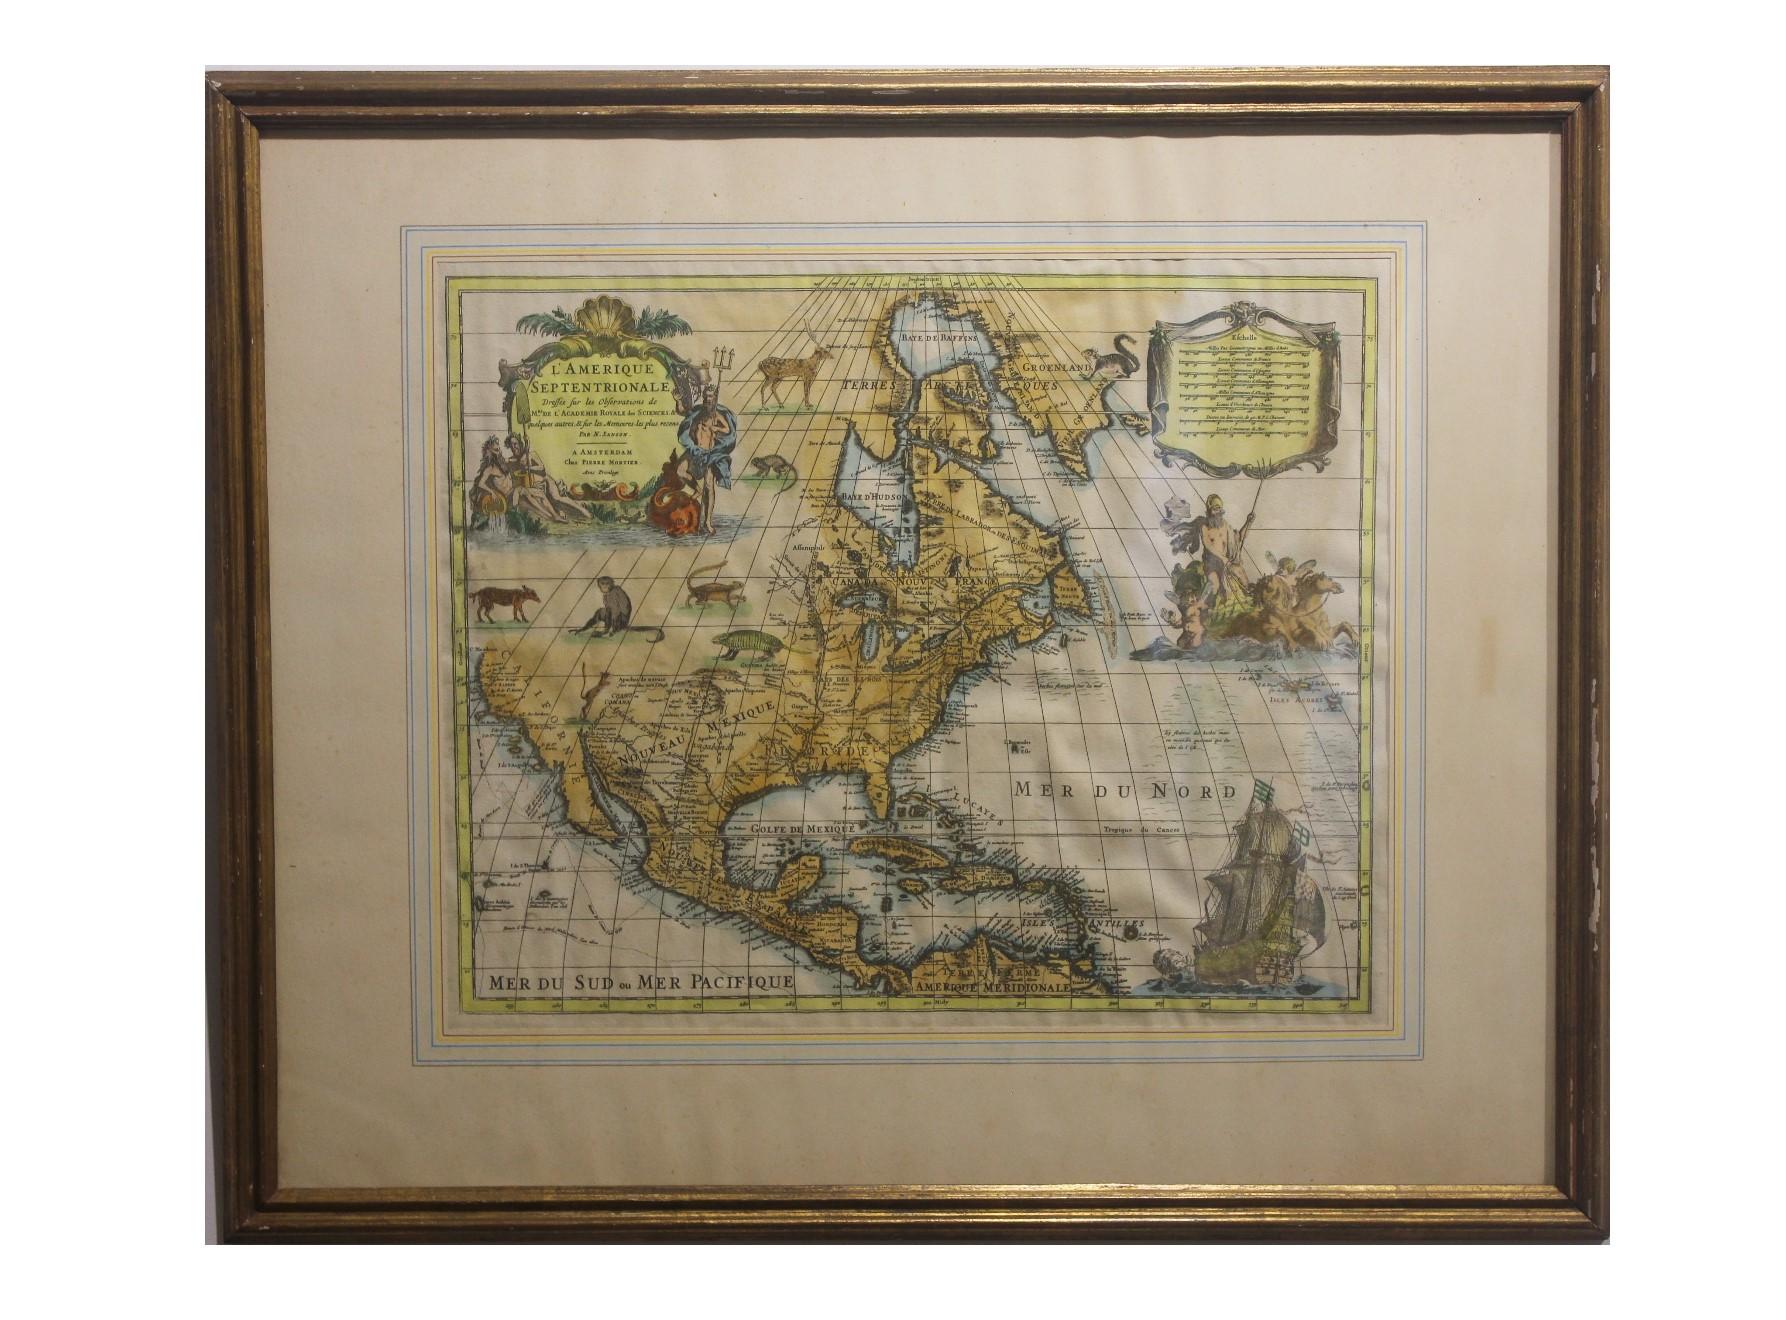 Chez Pierre Mortier Landscape Print - New Revised North America Map with Mythical Figures and Animals